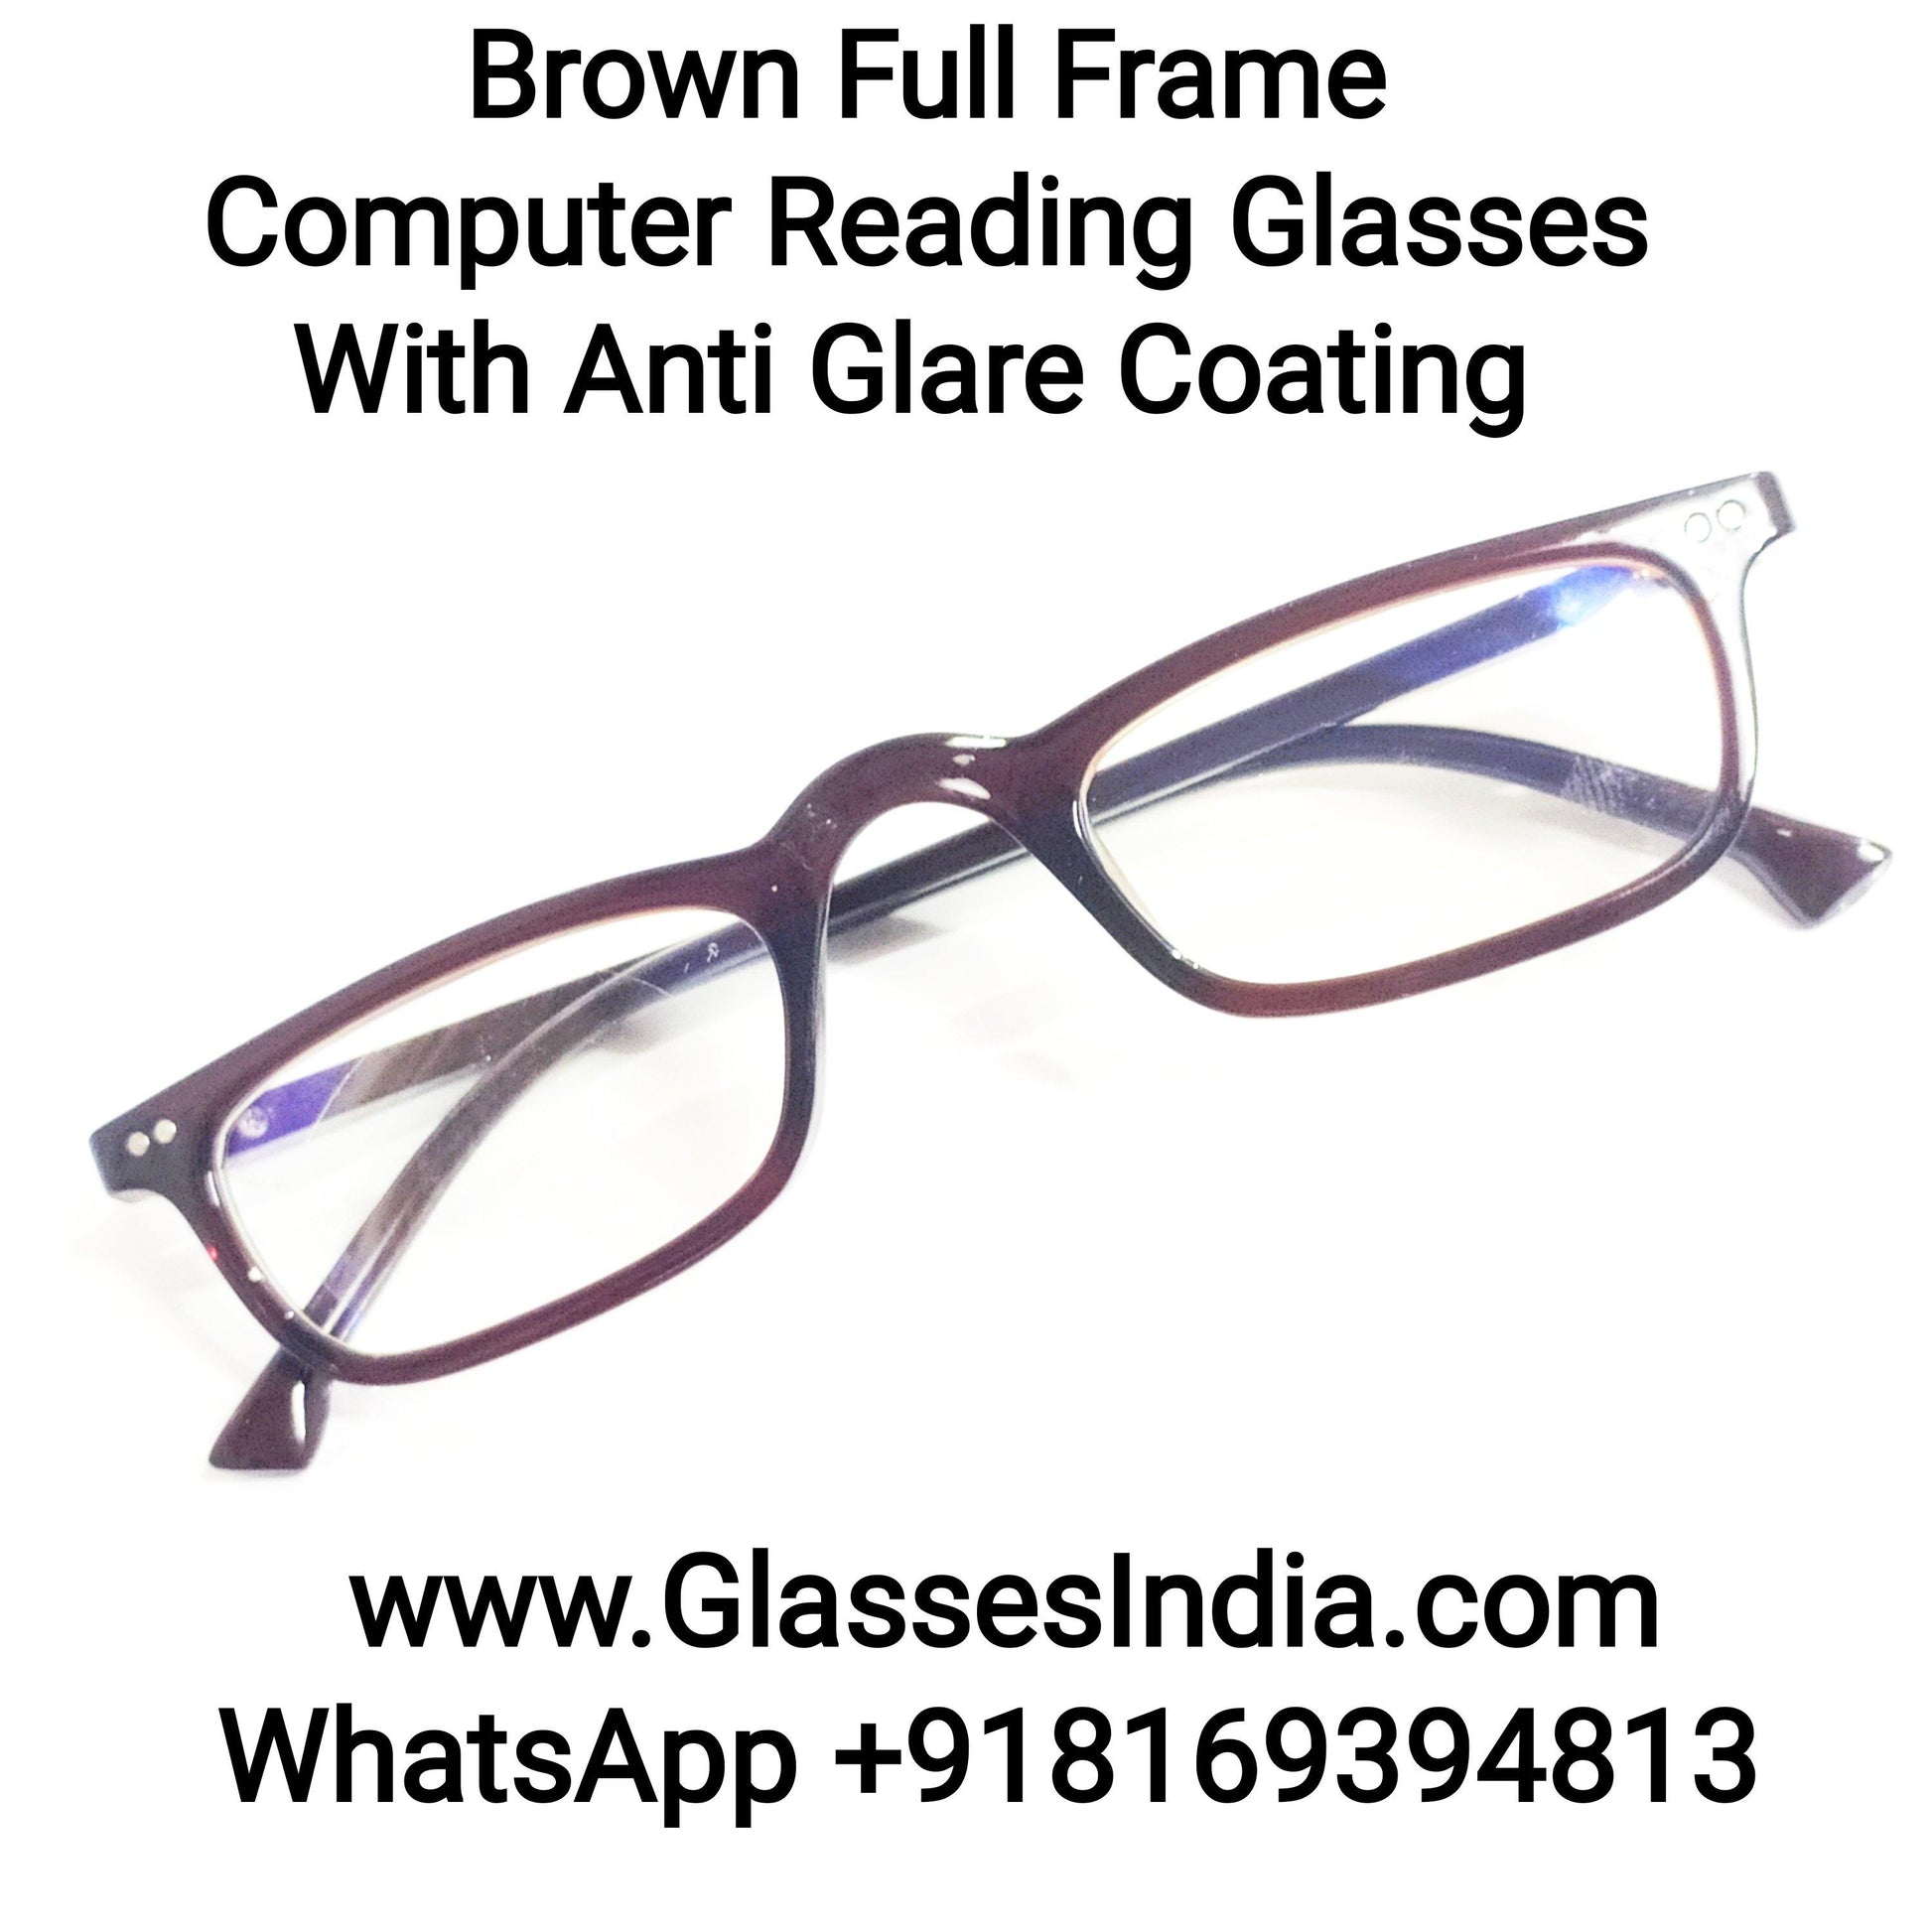 Buy Brown Full Frame Computer Reading Glasses with Anti Glare Coating Power 1.75 - Glasses India Online in India